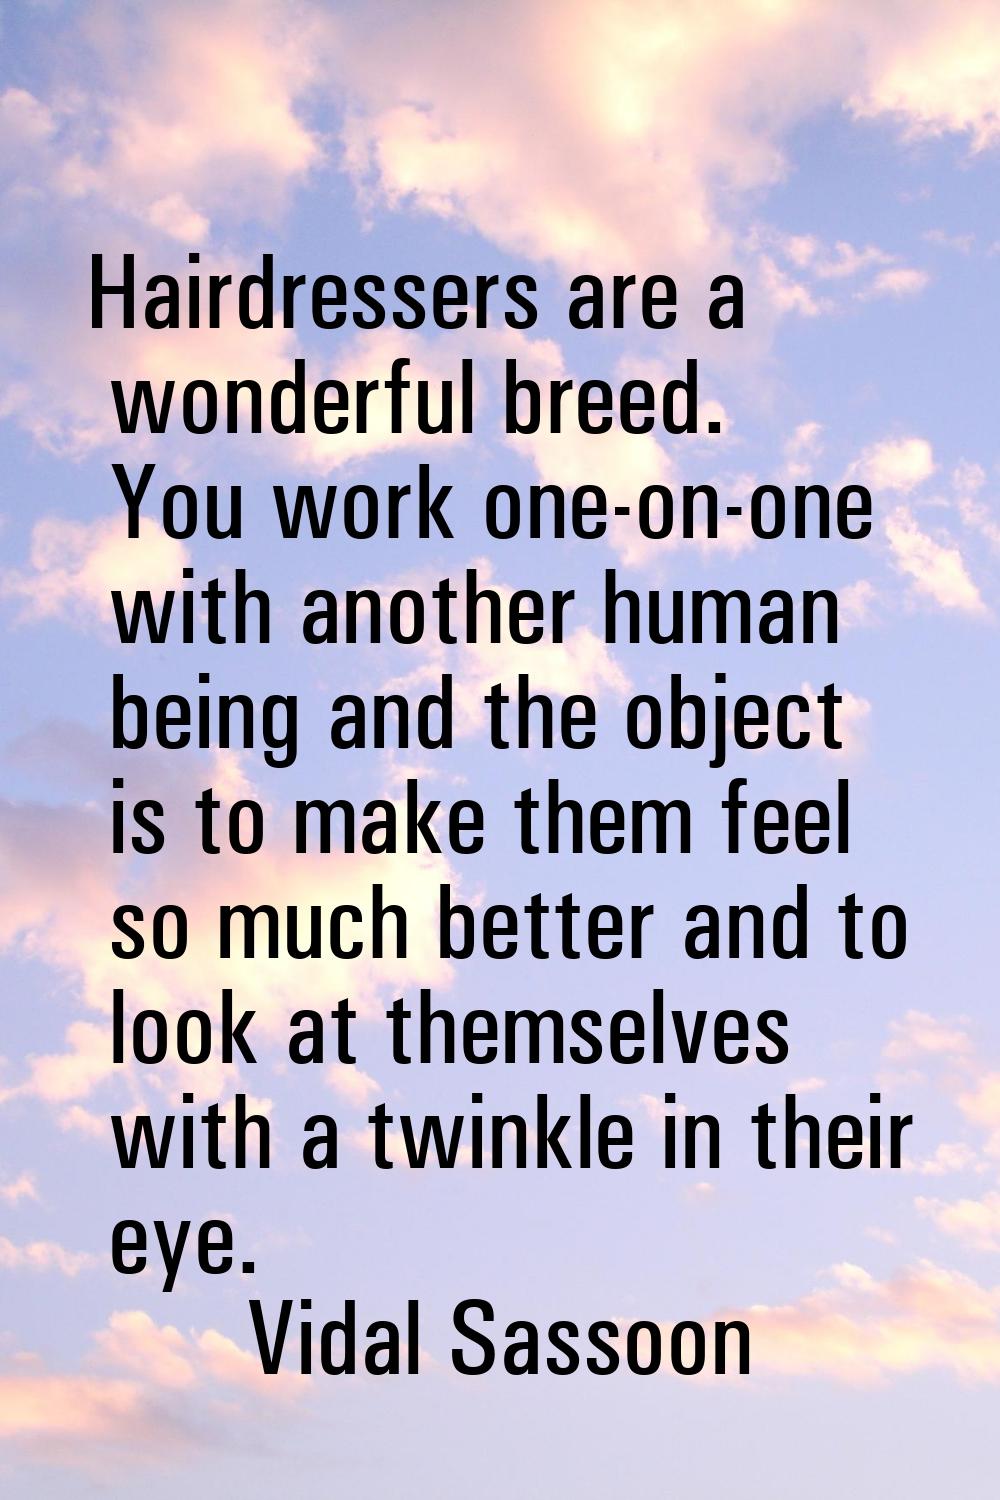 Hairdressers are a wonderful breed. You work one-on-one with another human being and the object is 